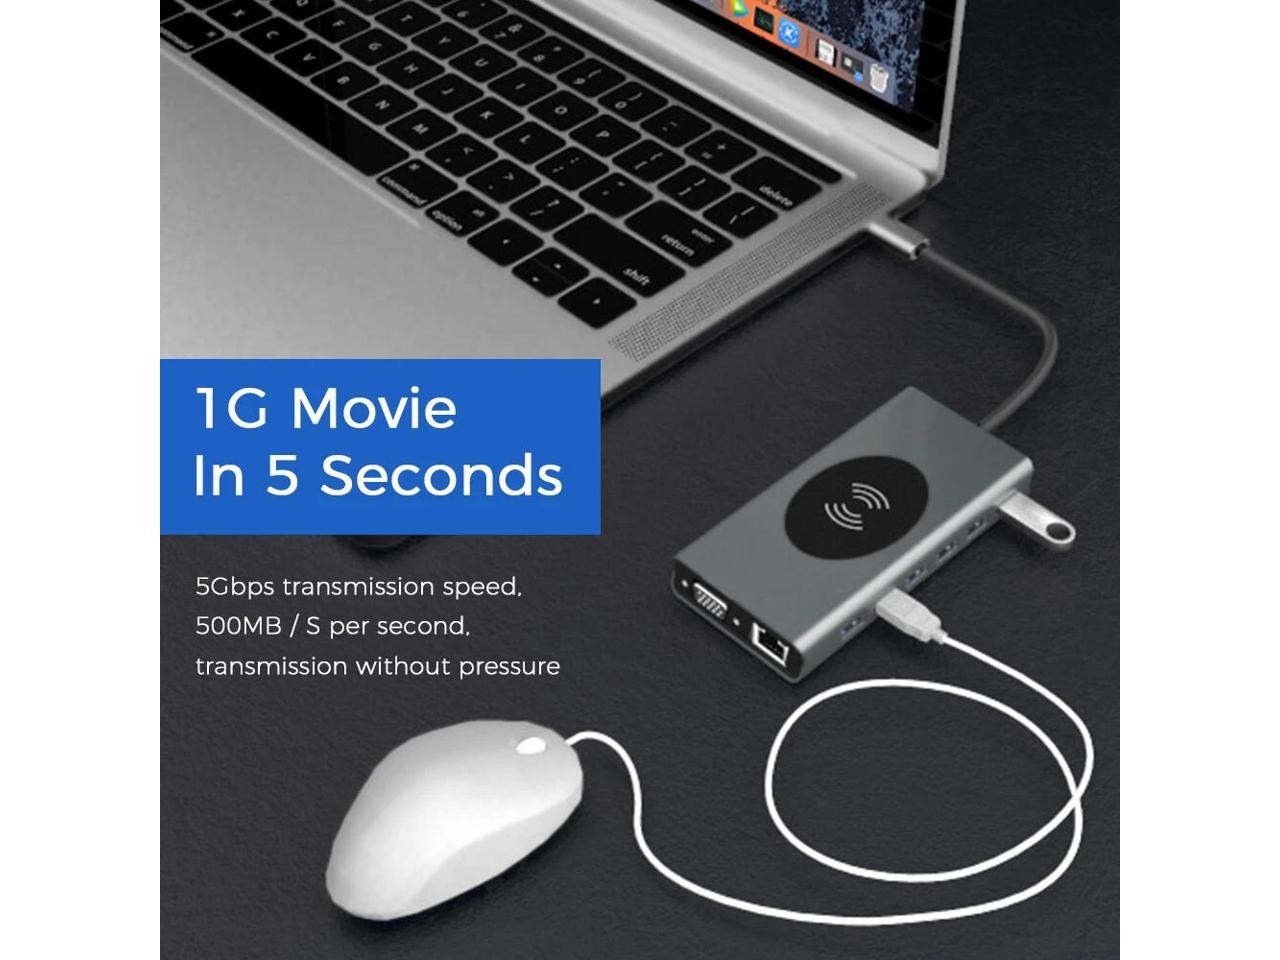 is there a wireless usb hub for macbook